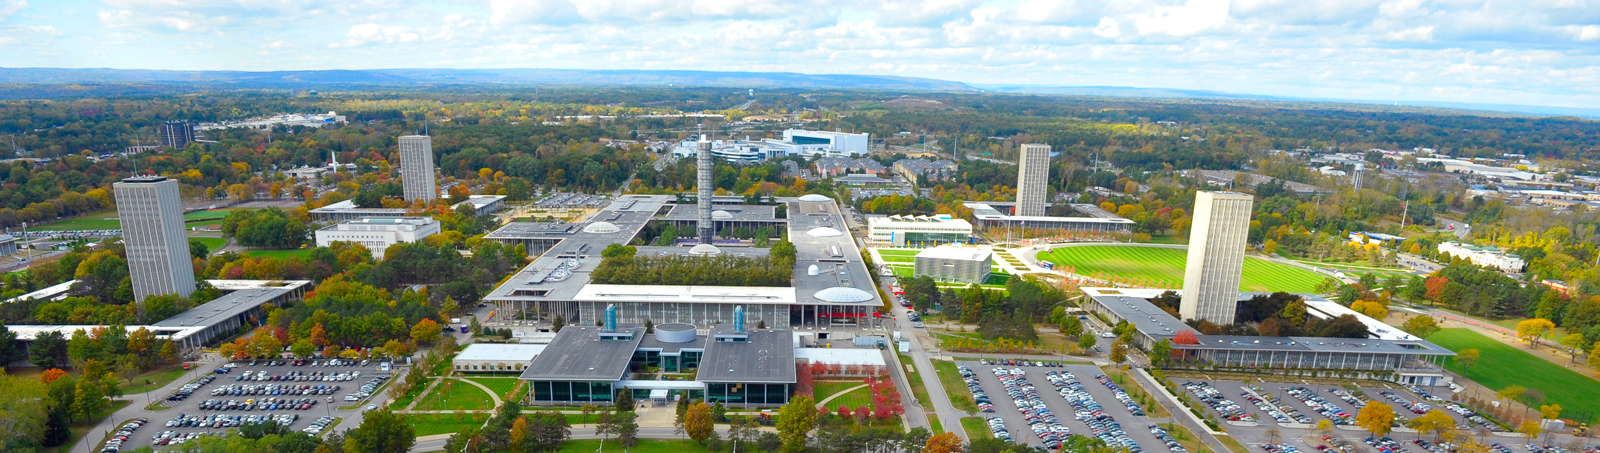 Aerial photo of the Uptown Campus with the Life Sciences Research Building in the foreground